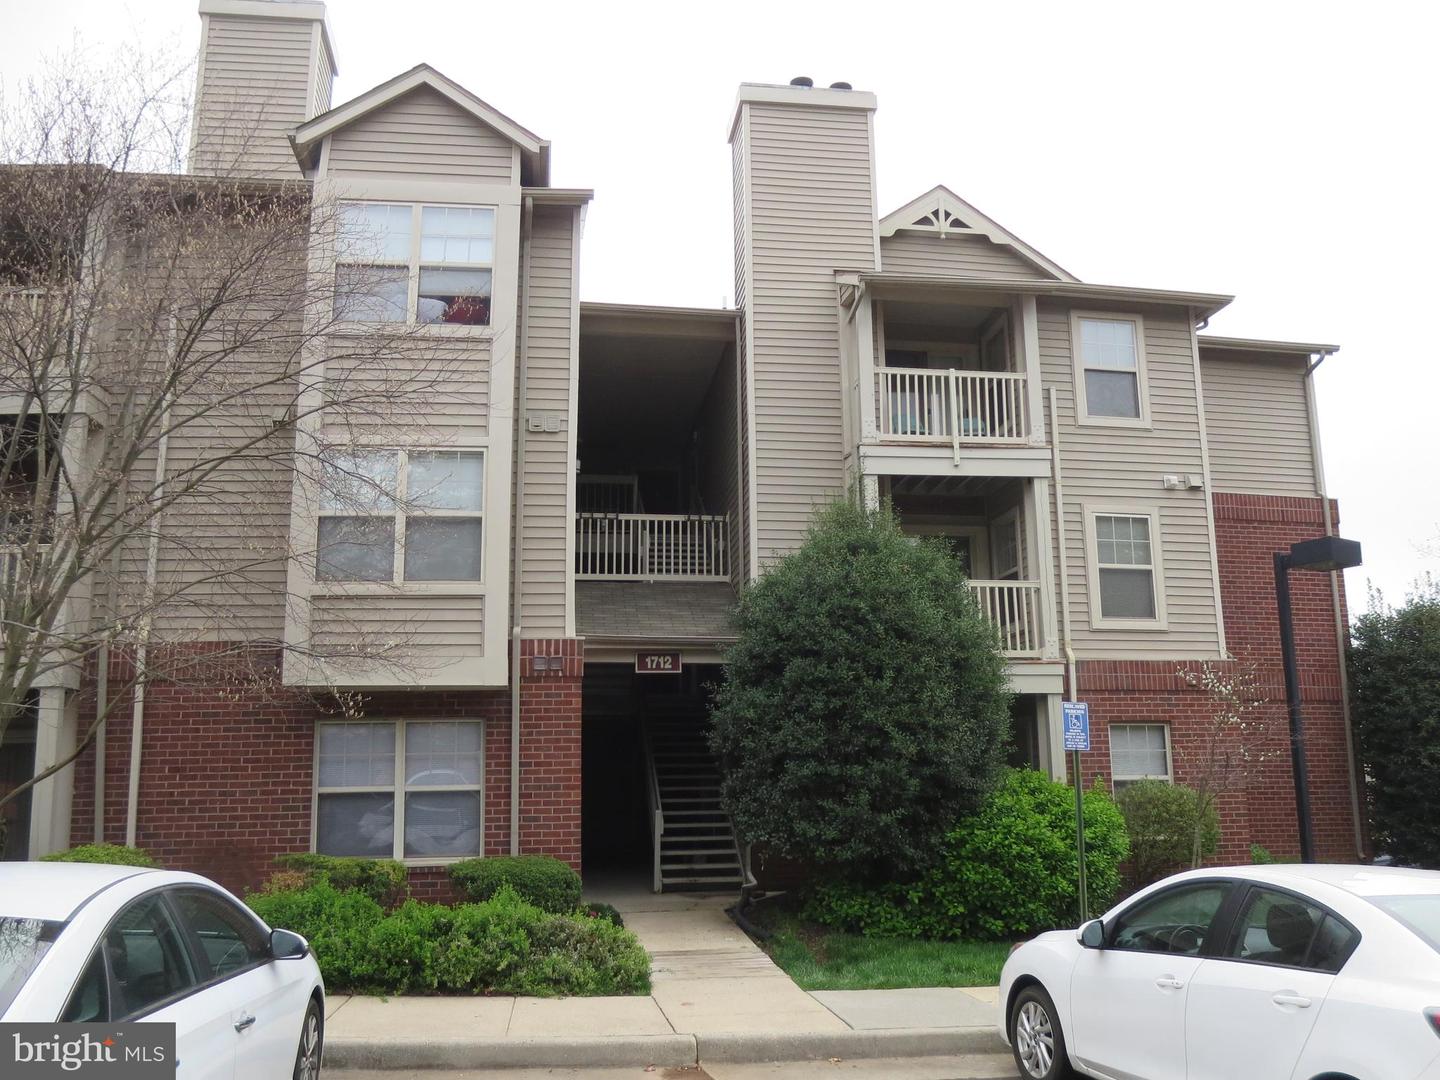 Photo 1 of 15 of 1712 Abercromby Ct #1712f multi-family property